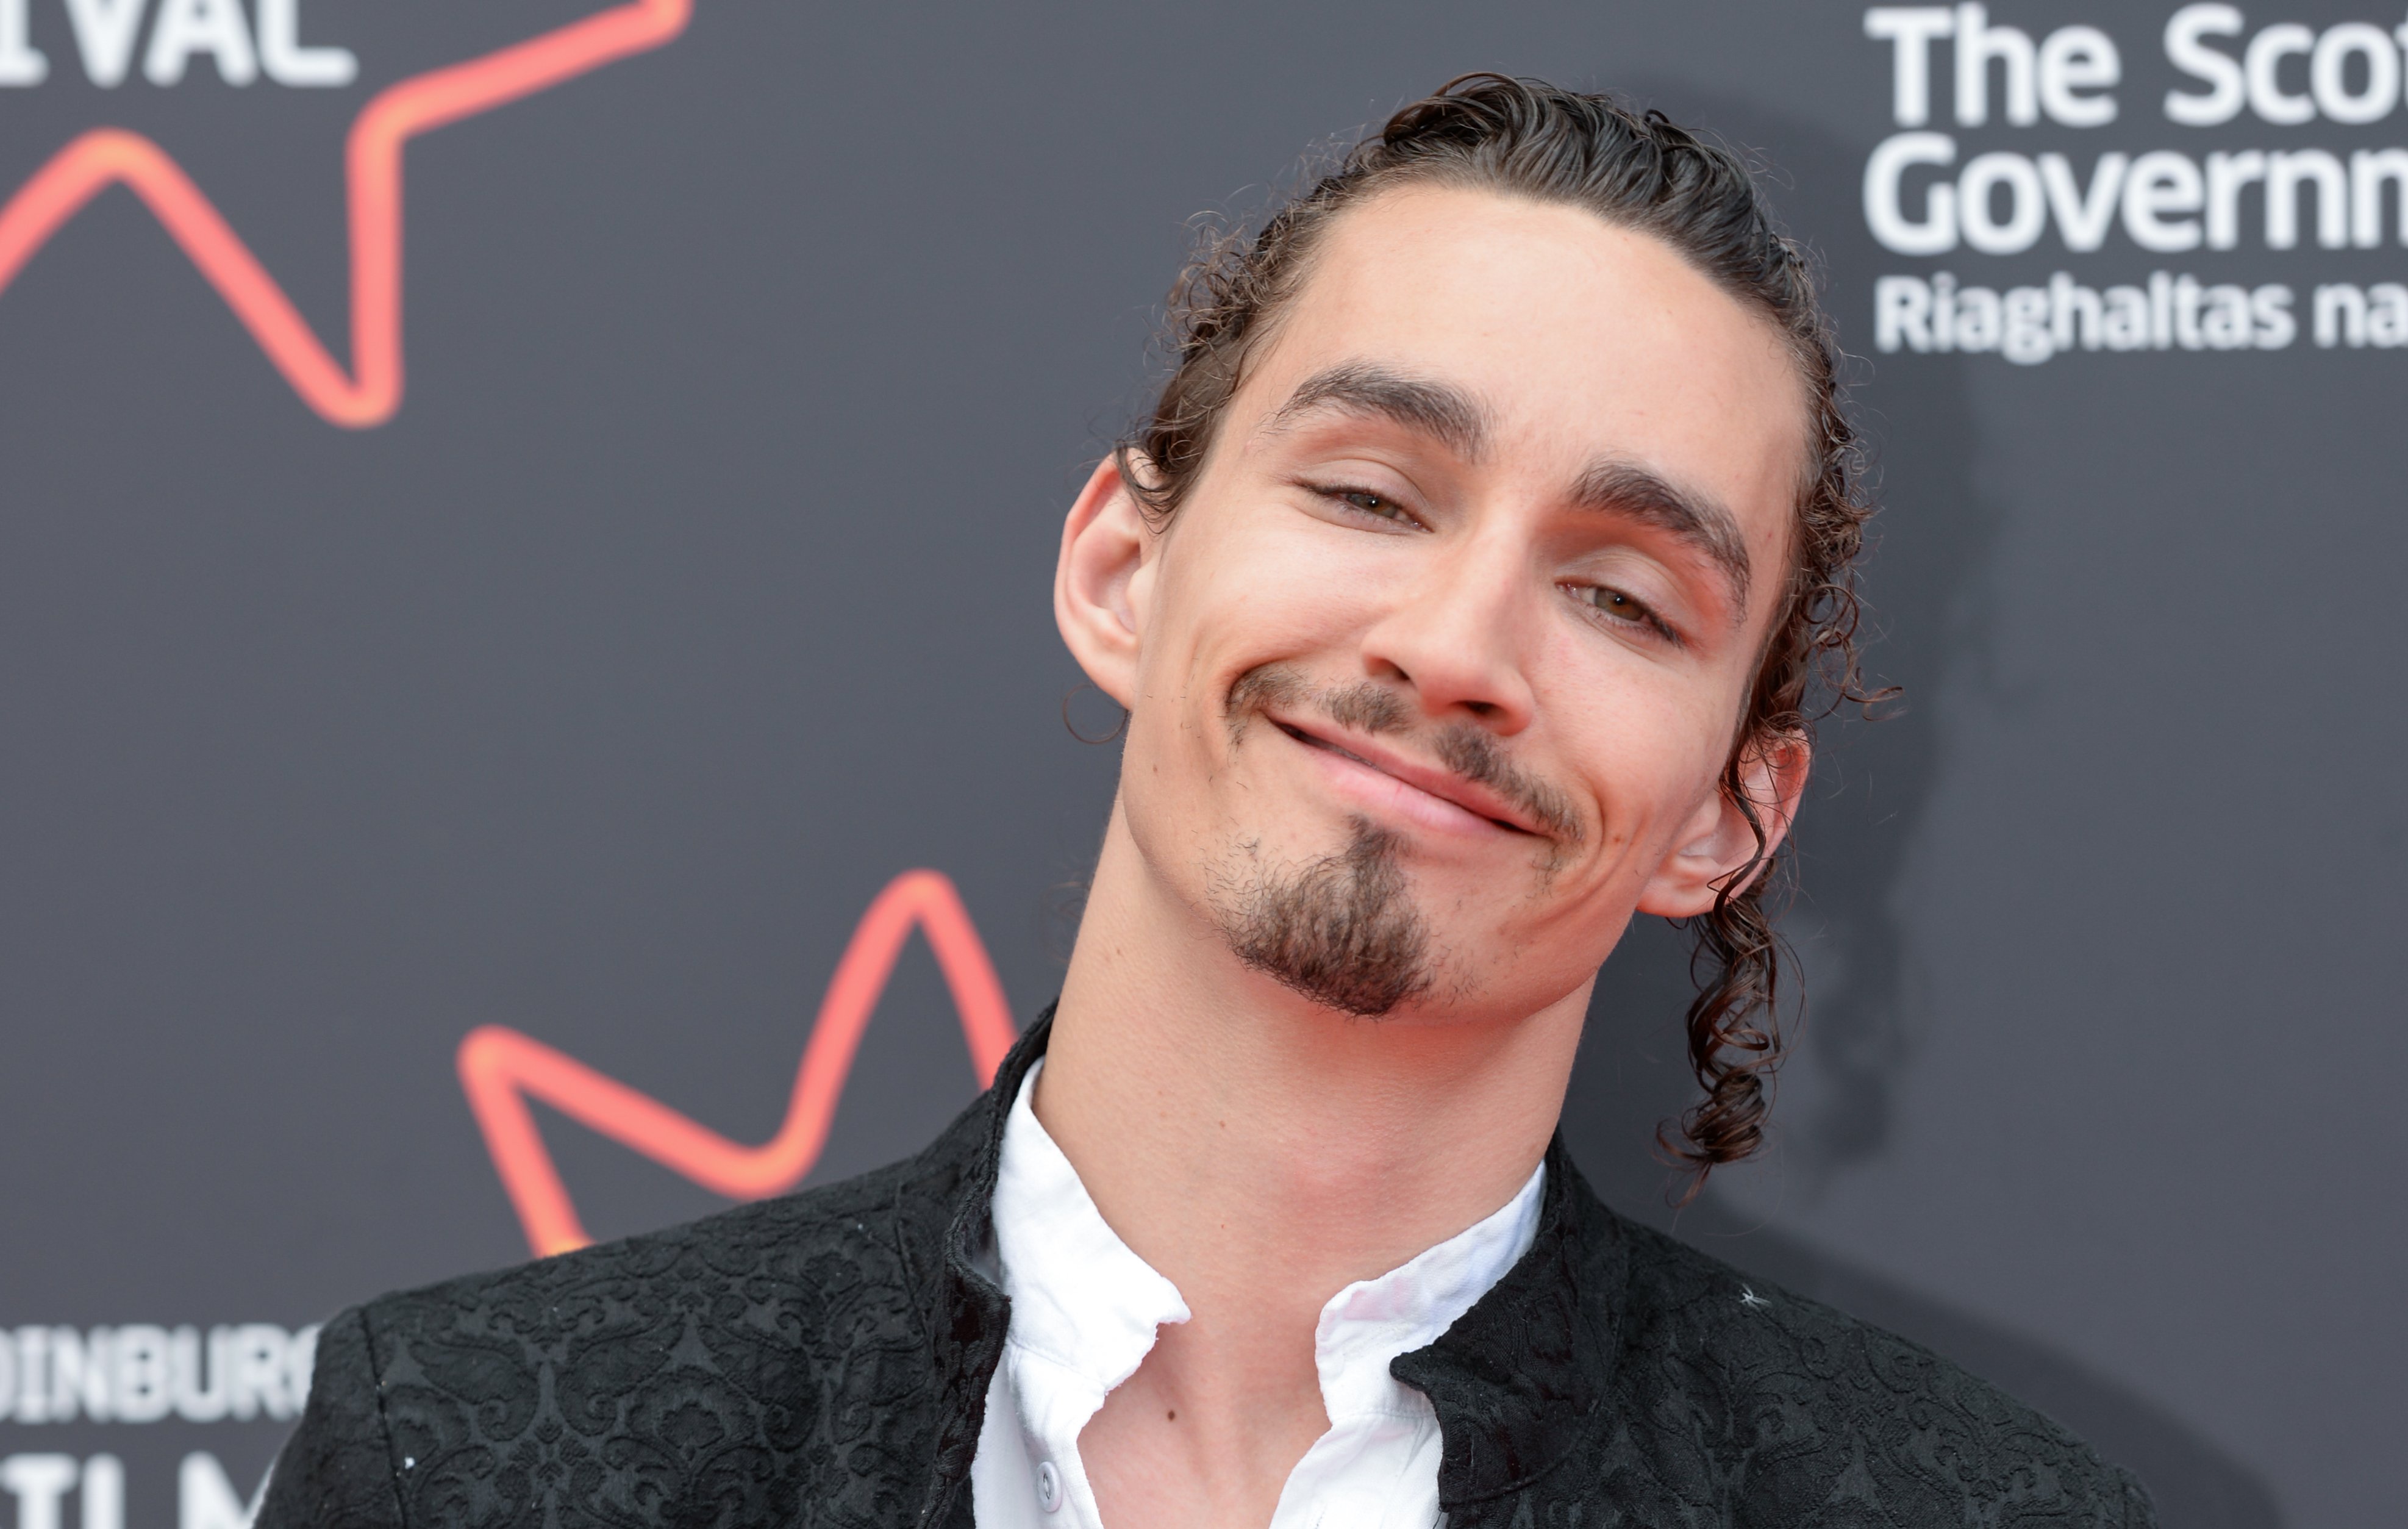 Robert Sheehan attends a photocall for "Jet Trash" at the 70th Edinburgh International Film Festival at Cineworld on June 24, 2016, in Edinburgh, Scotland. | Source: Getty Images